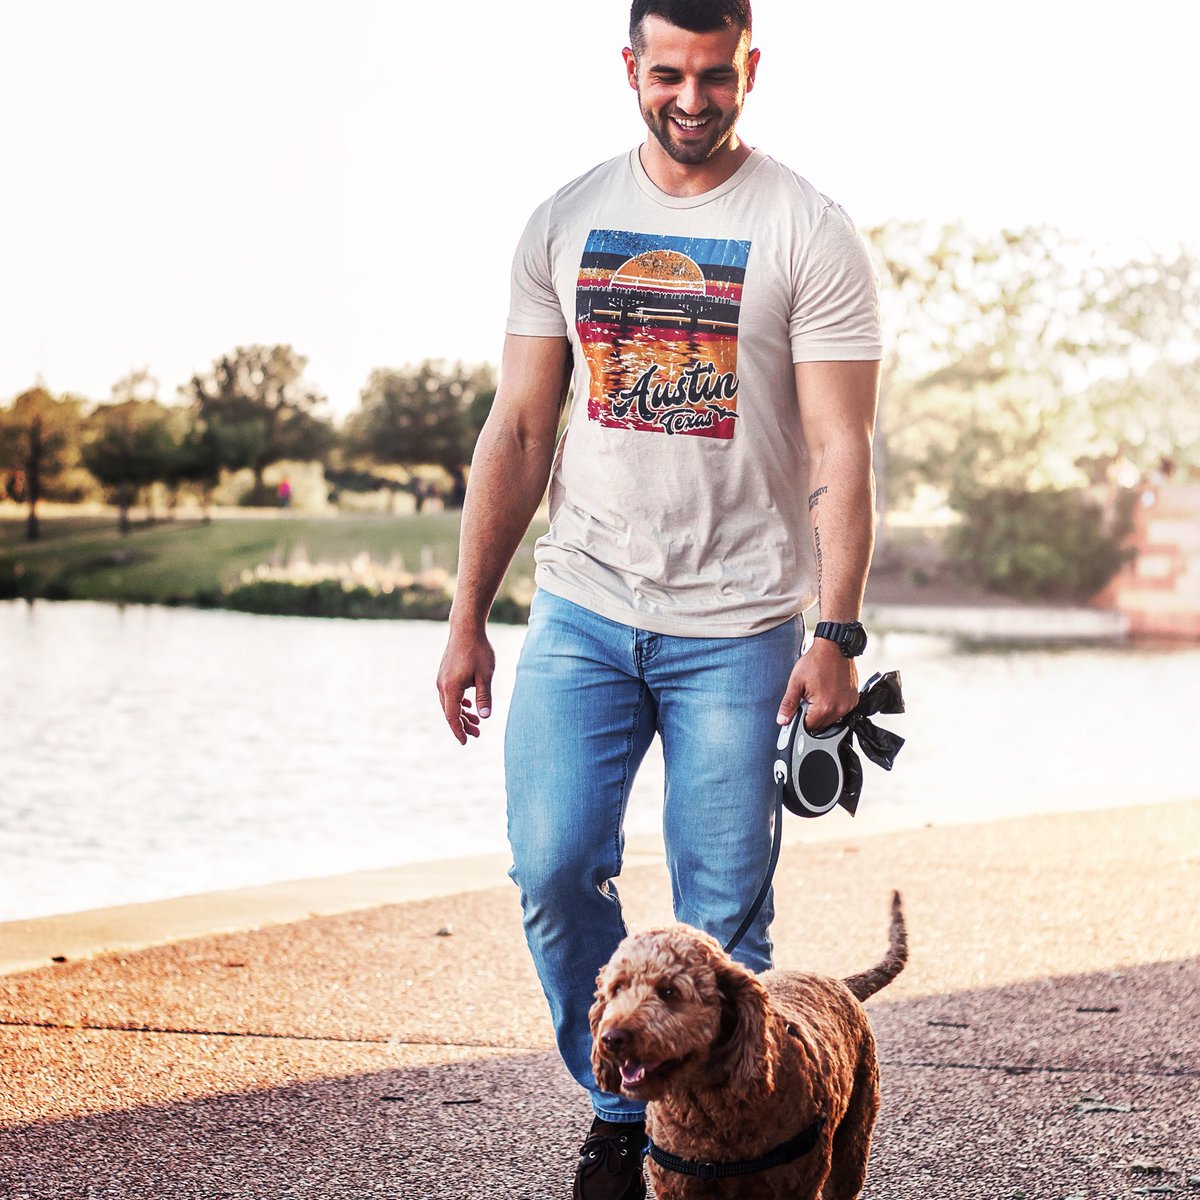 Mondays are great if you can spend it with your dog. Simple pleasures, dogs and a great t-shirt! 
•
•
#mondaymotivation #dogloverstagram #texastshirt #austinlifestyle #atxlifestyle #atxlove #shoplocalatx #austintshirt #dogwalkinglife #atxdoglovers #atxboutique